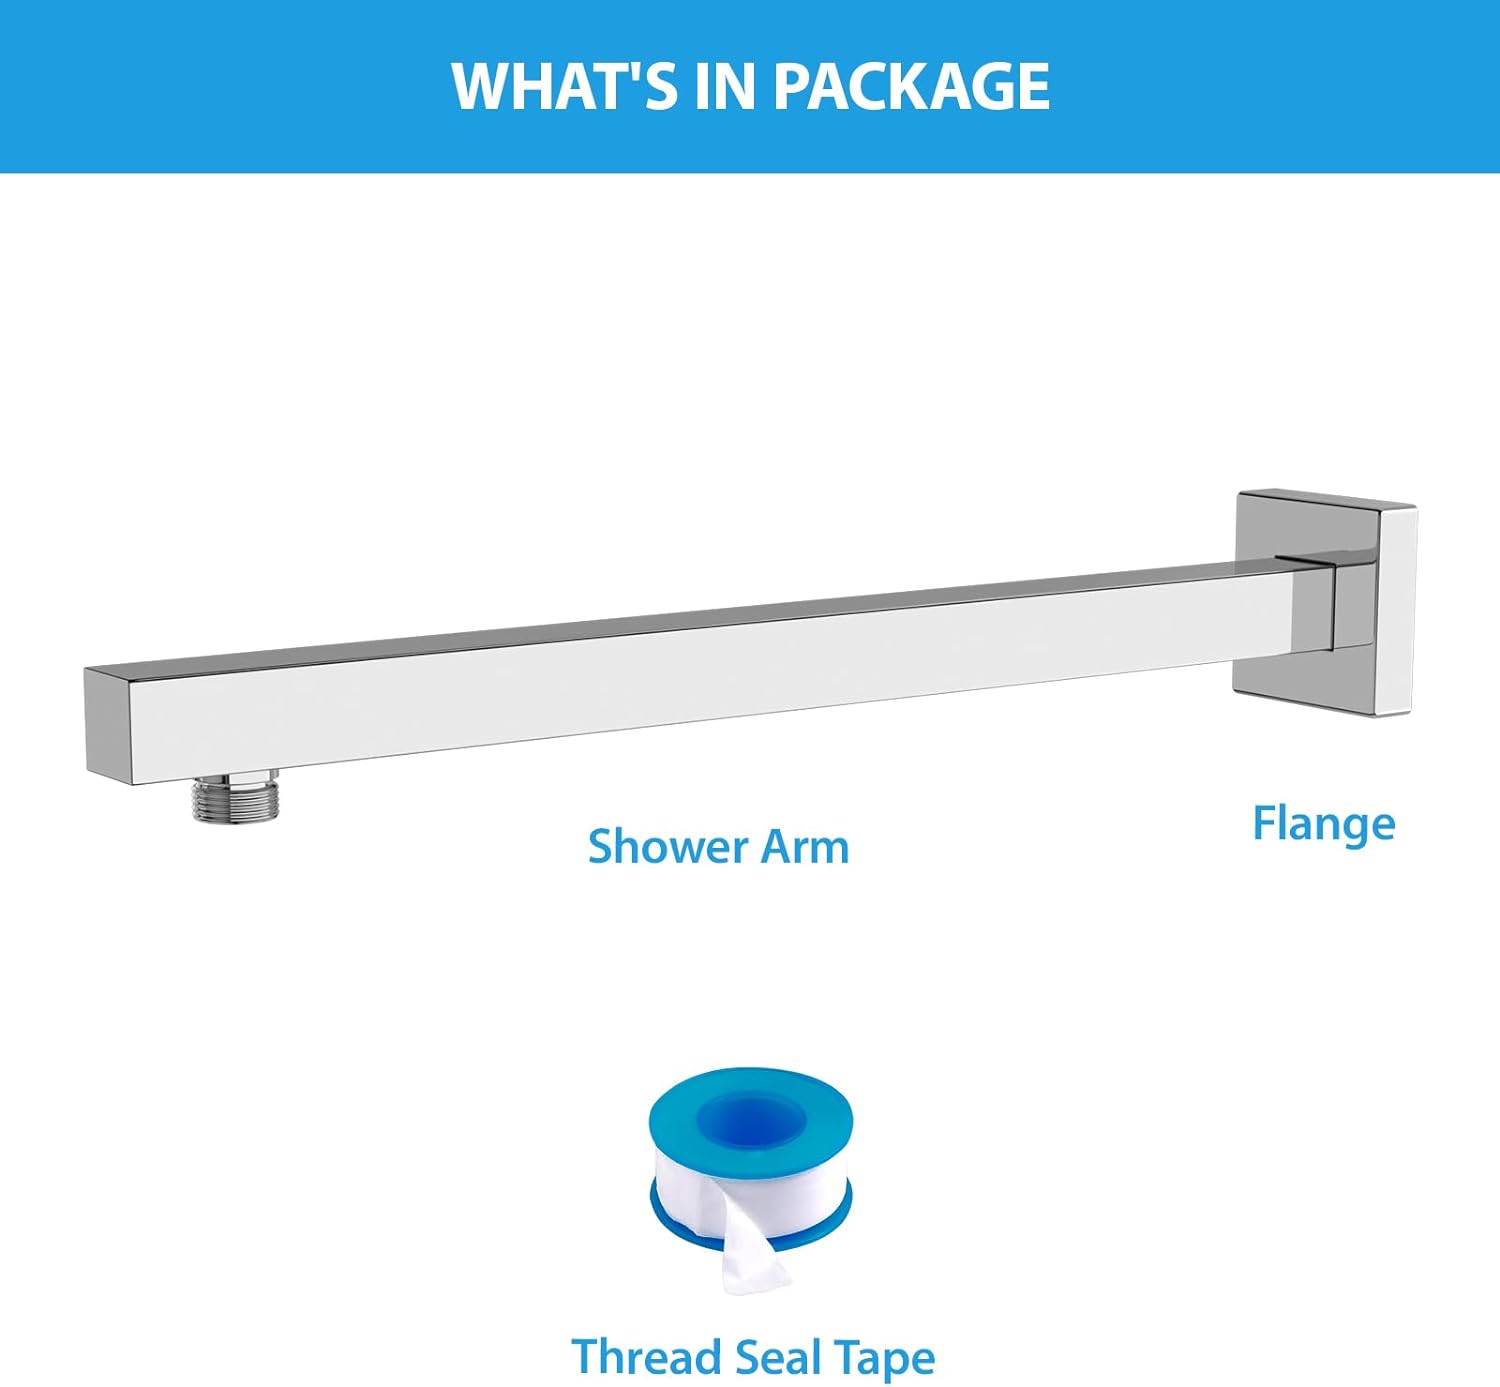 Lordear 16 Inch Shower Arm, Brushed Nicke/Chrome Finish, Rain Shower Head Extension Arm With Flange and Teflon Tape,304 Stainless Steel Rain Shower Arm Wall Mounted from Lordear